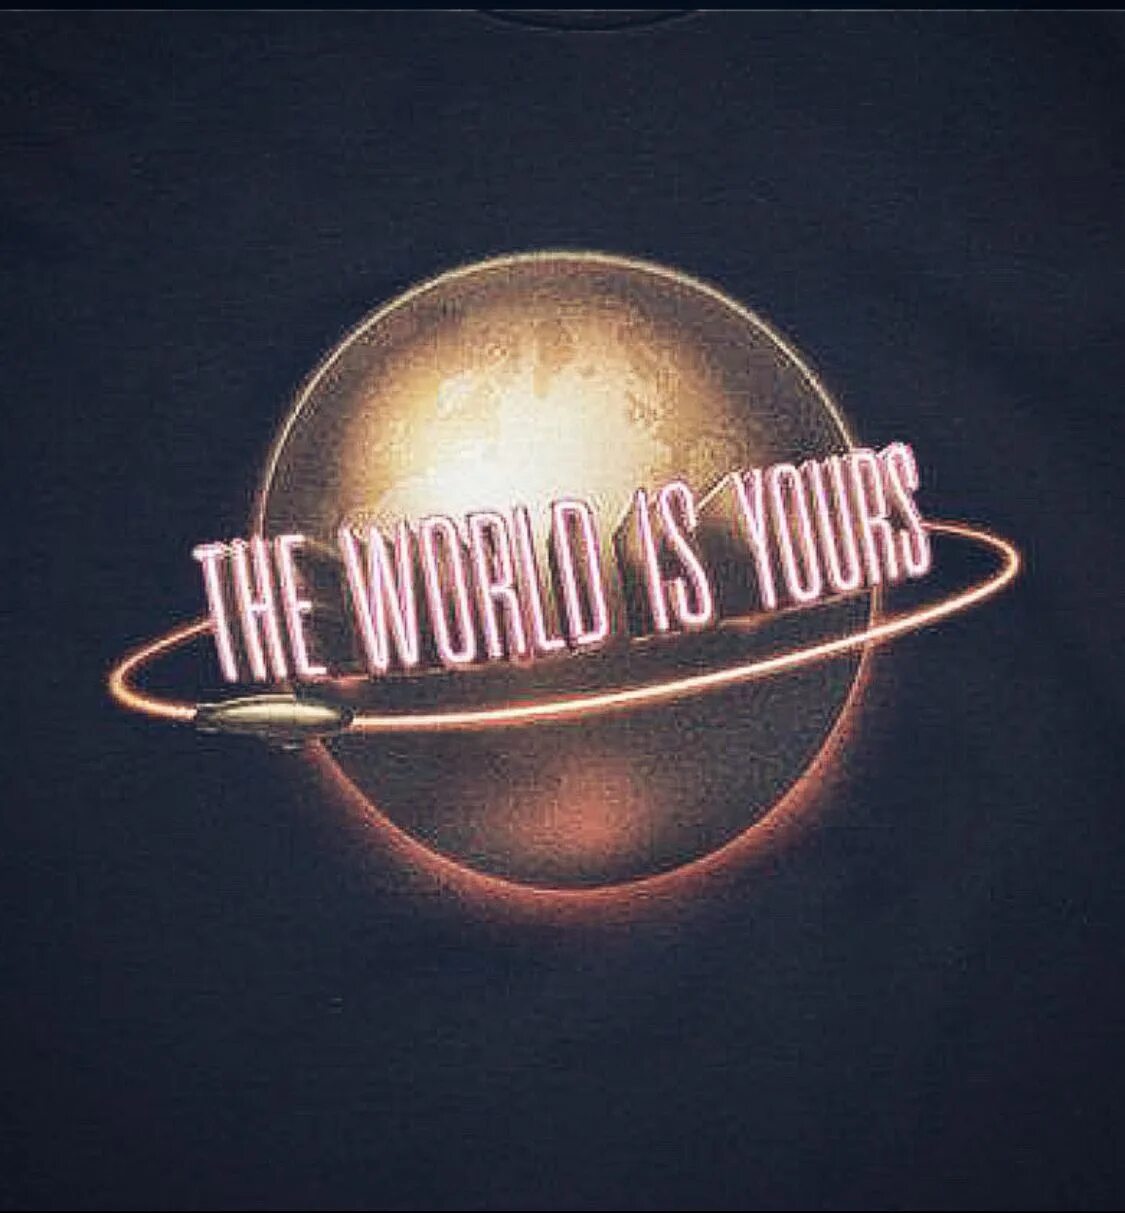 The World is yours. Scarface the World is yours тату. The World is mine лицо со шрамом. The World is yours картина.